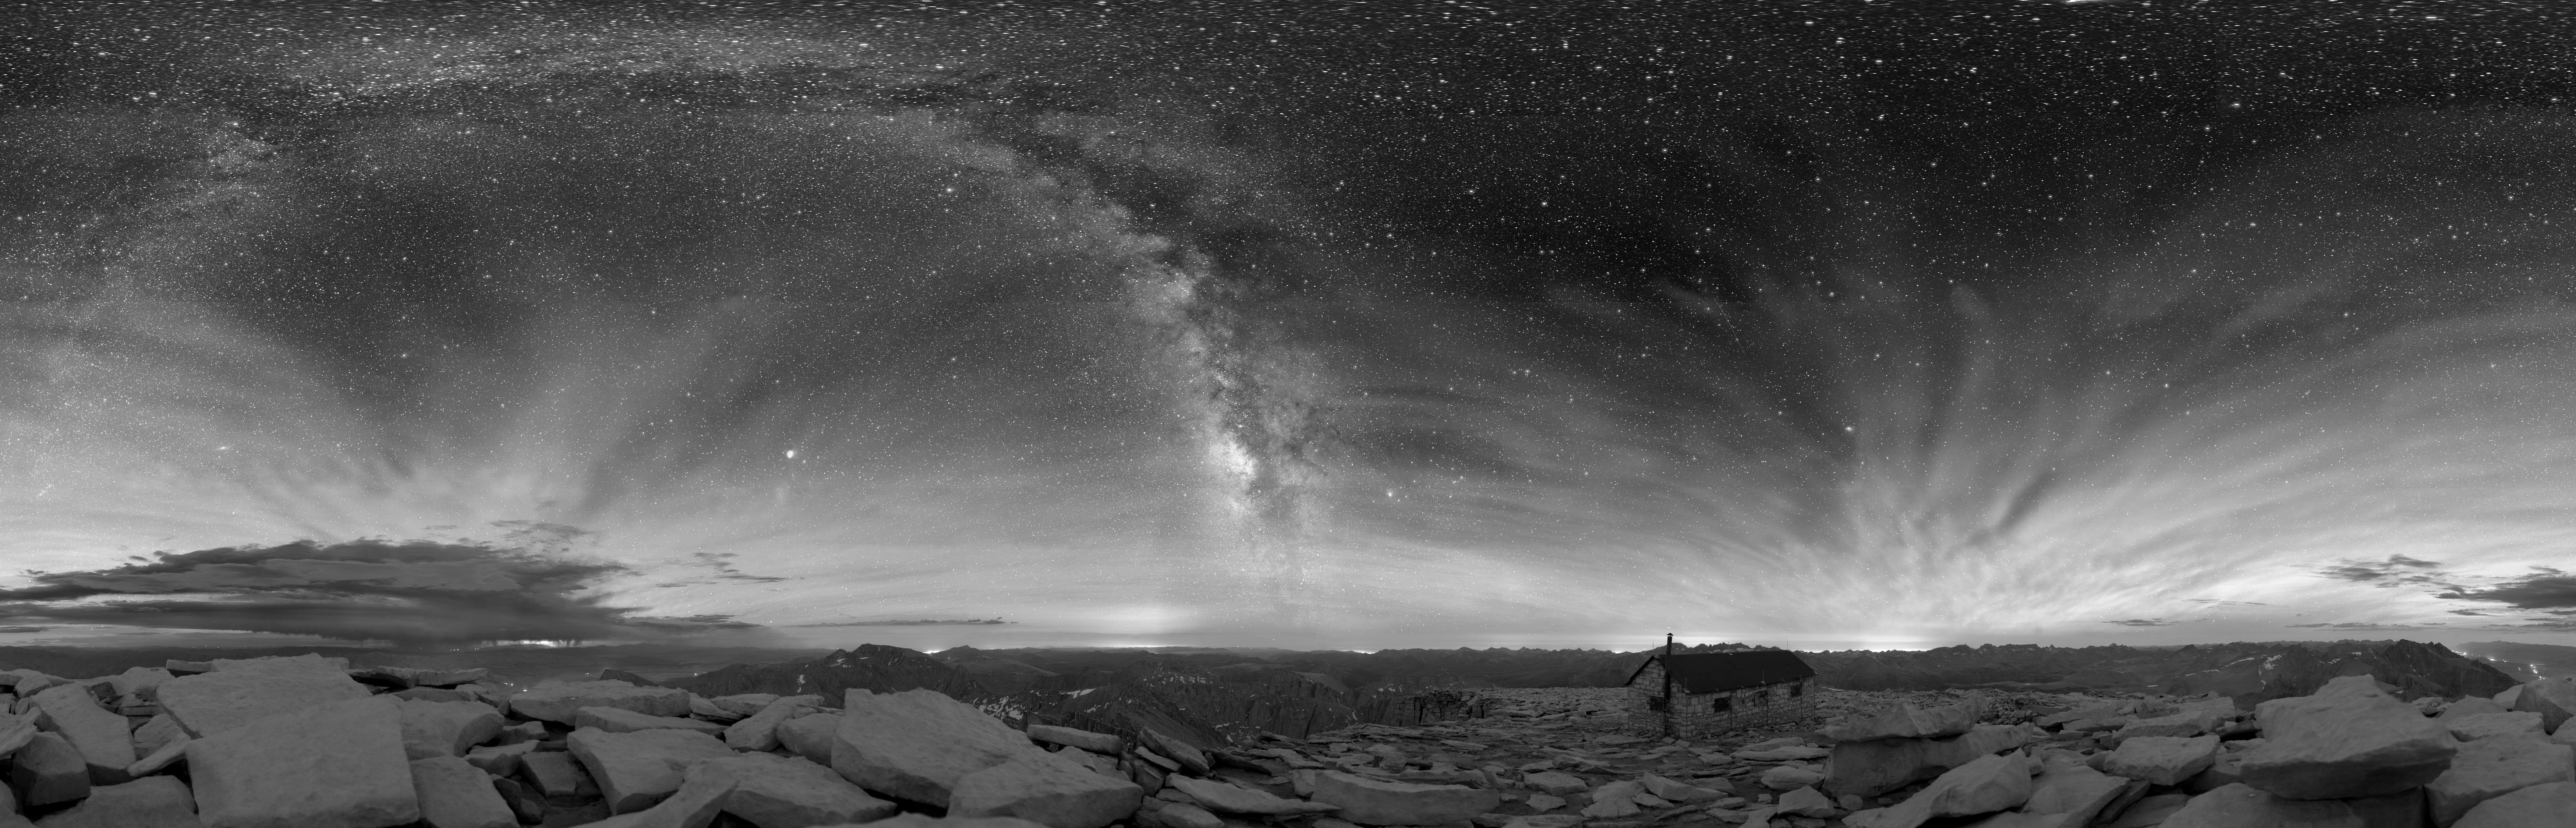 mt whitney nasa picture of the day